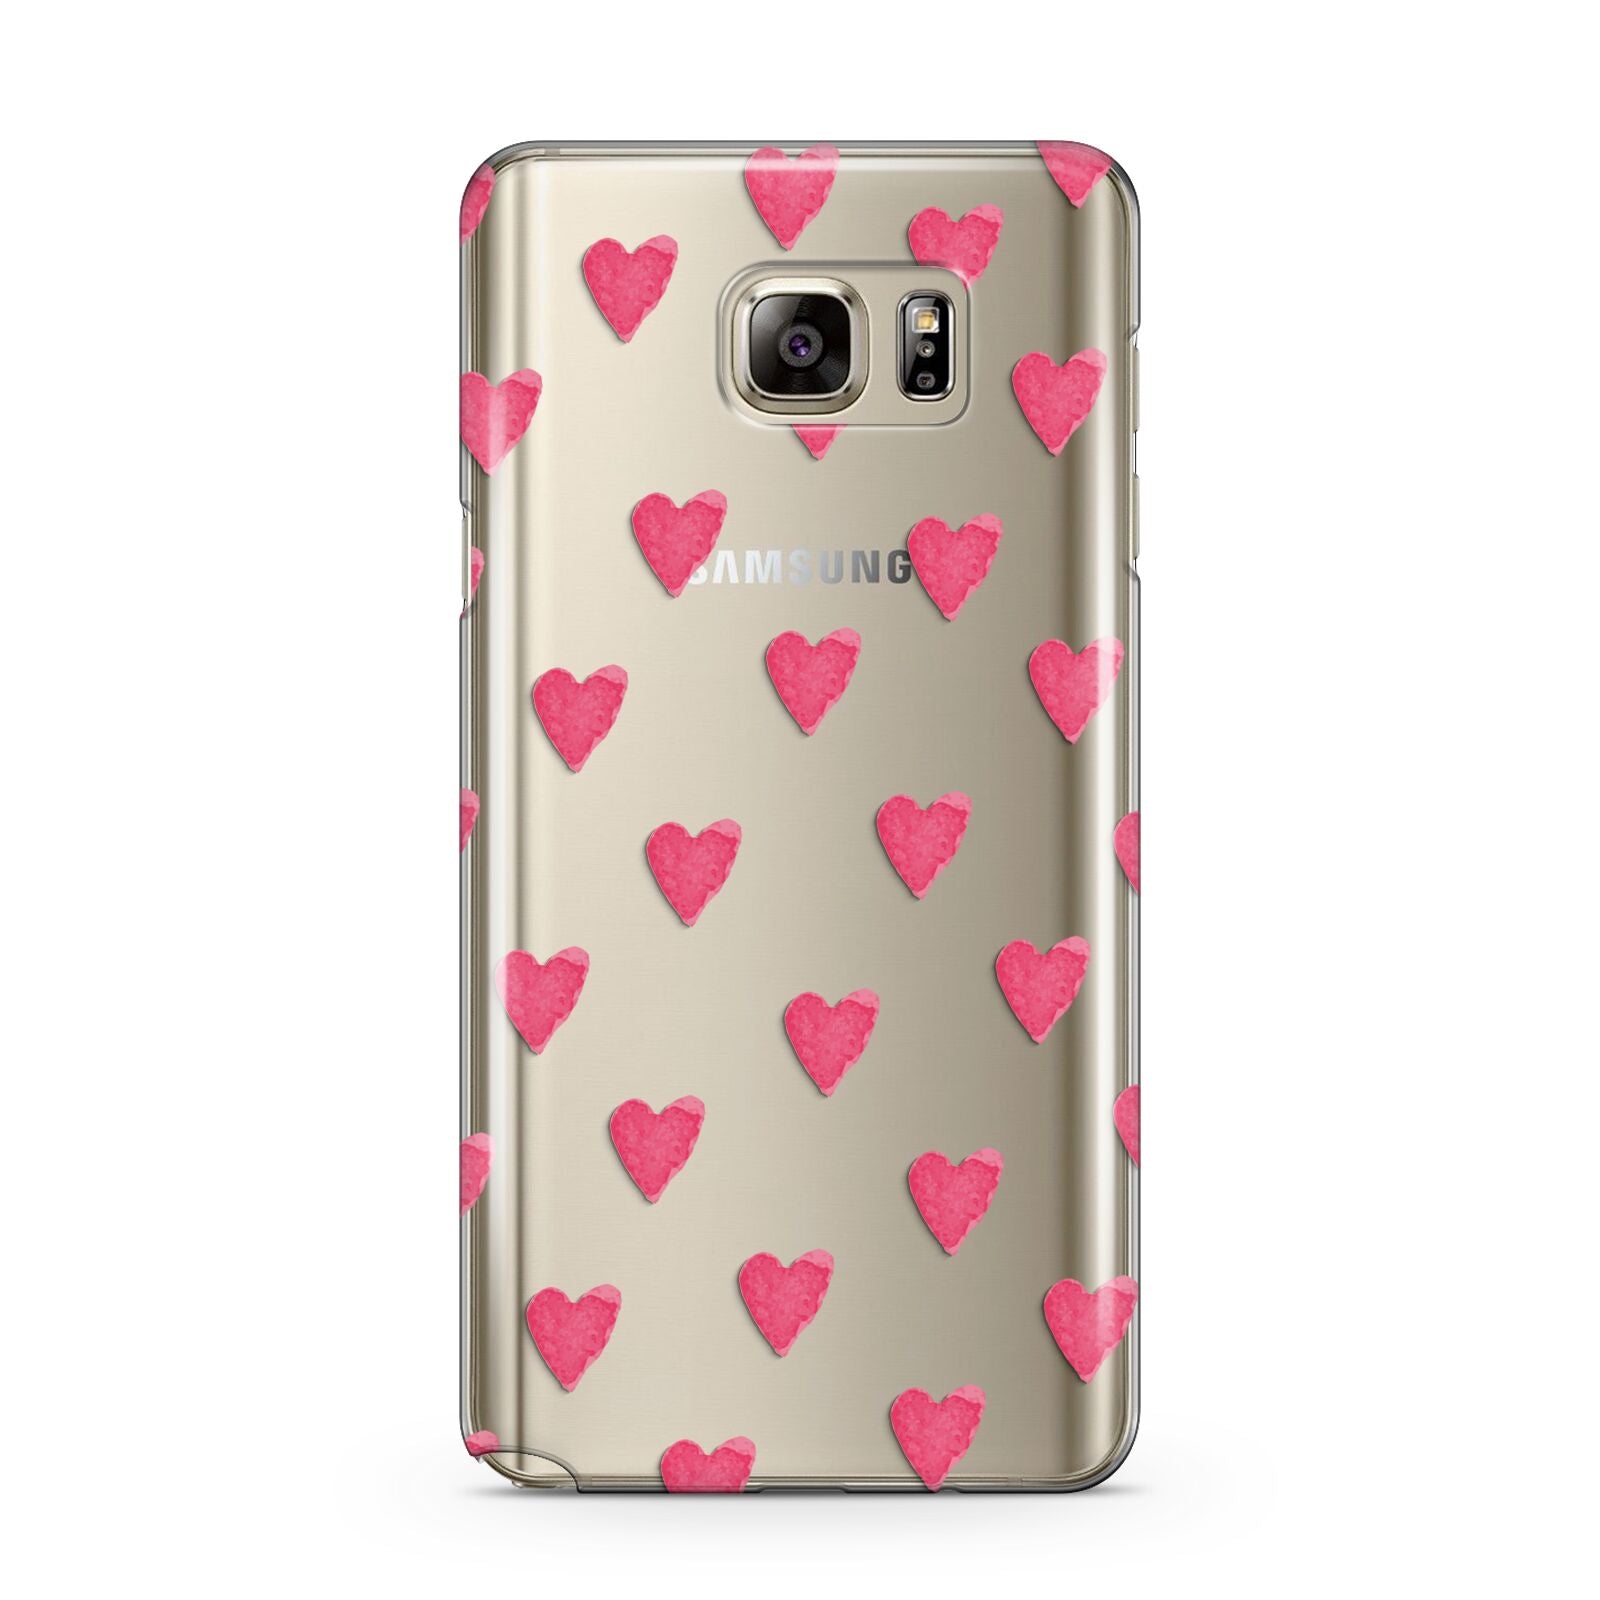 Heart Patterned Samsung Galaxy Note 5 Case